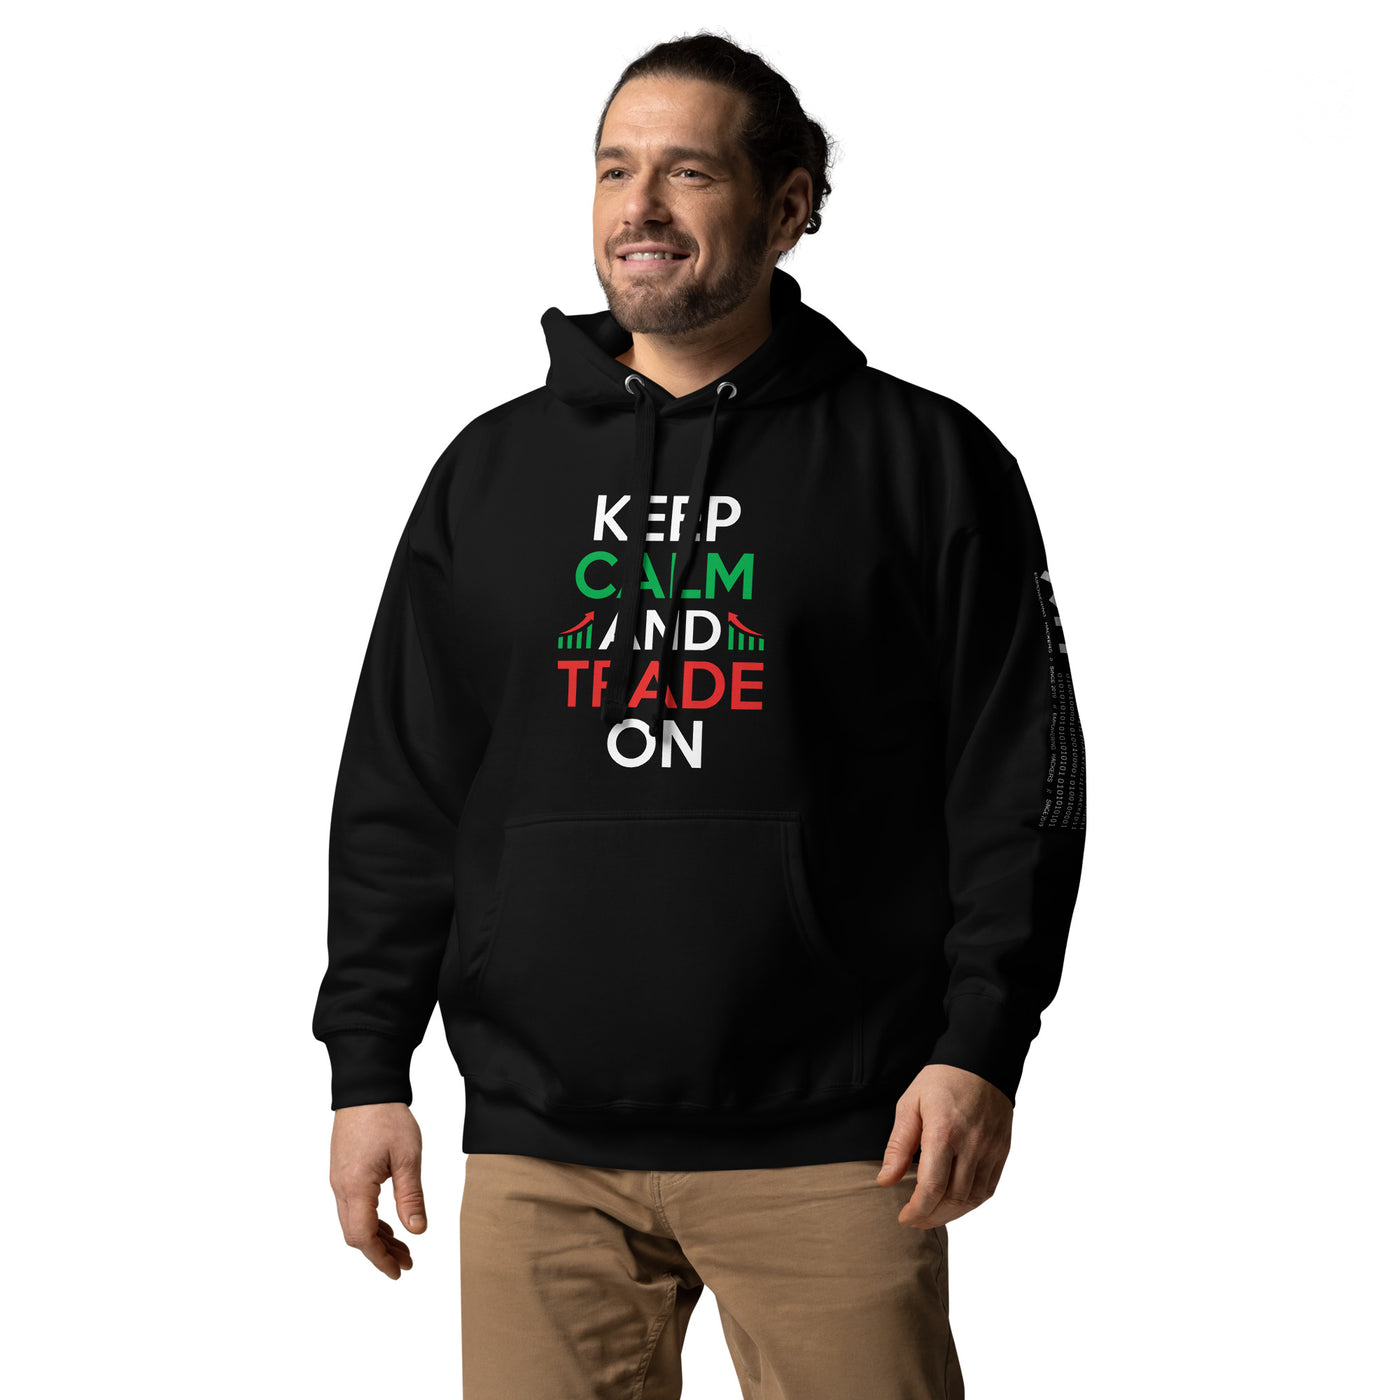 Keep Calm and Trade On - Unisex Hoodie